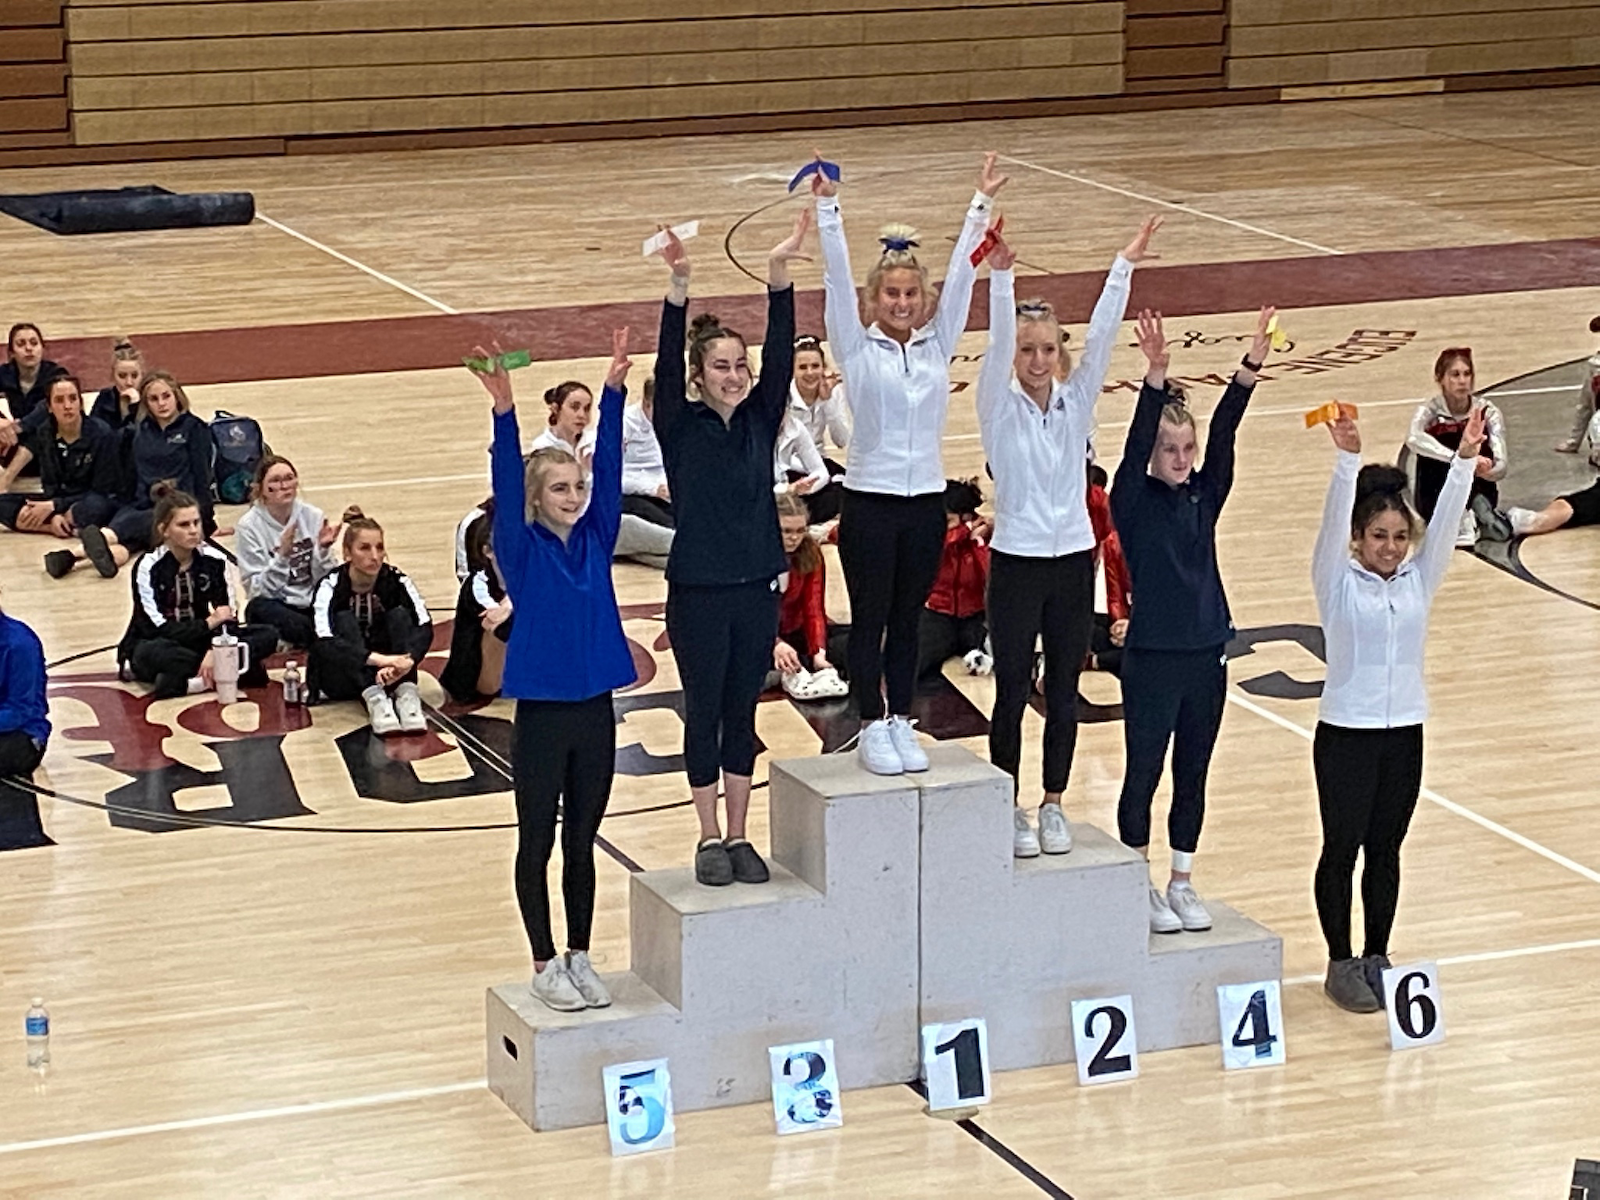 Gina Zirille - All Around Sectional Champion cover photo